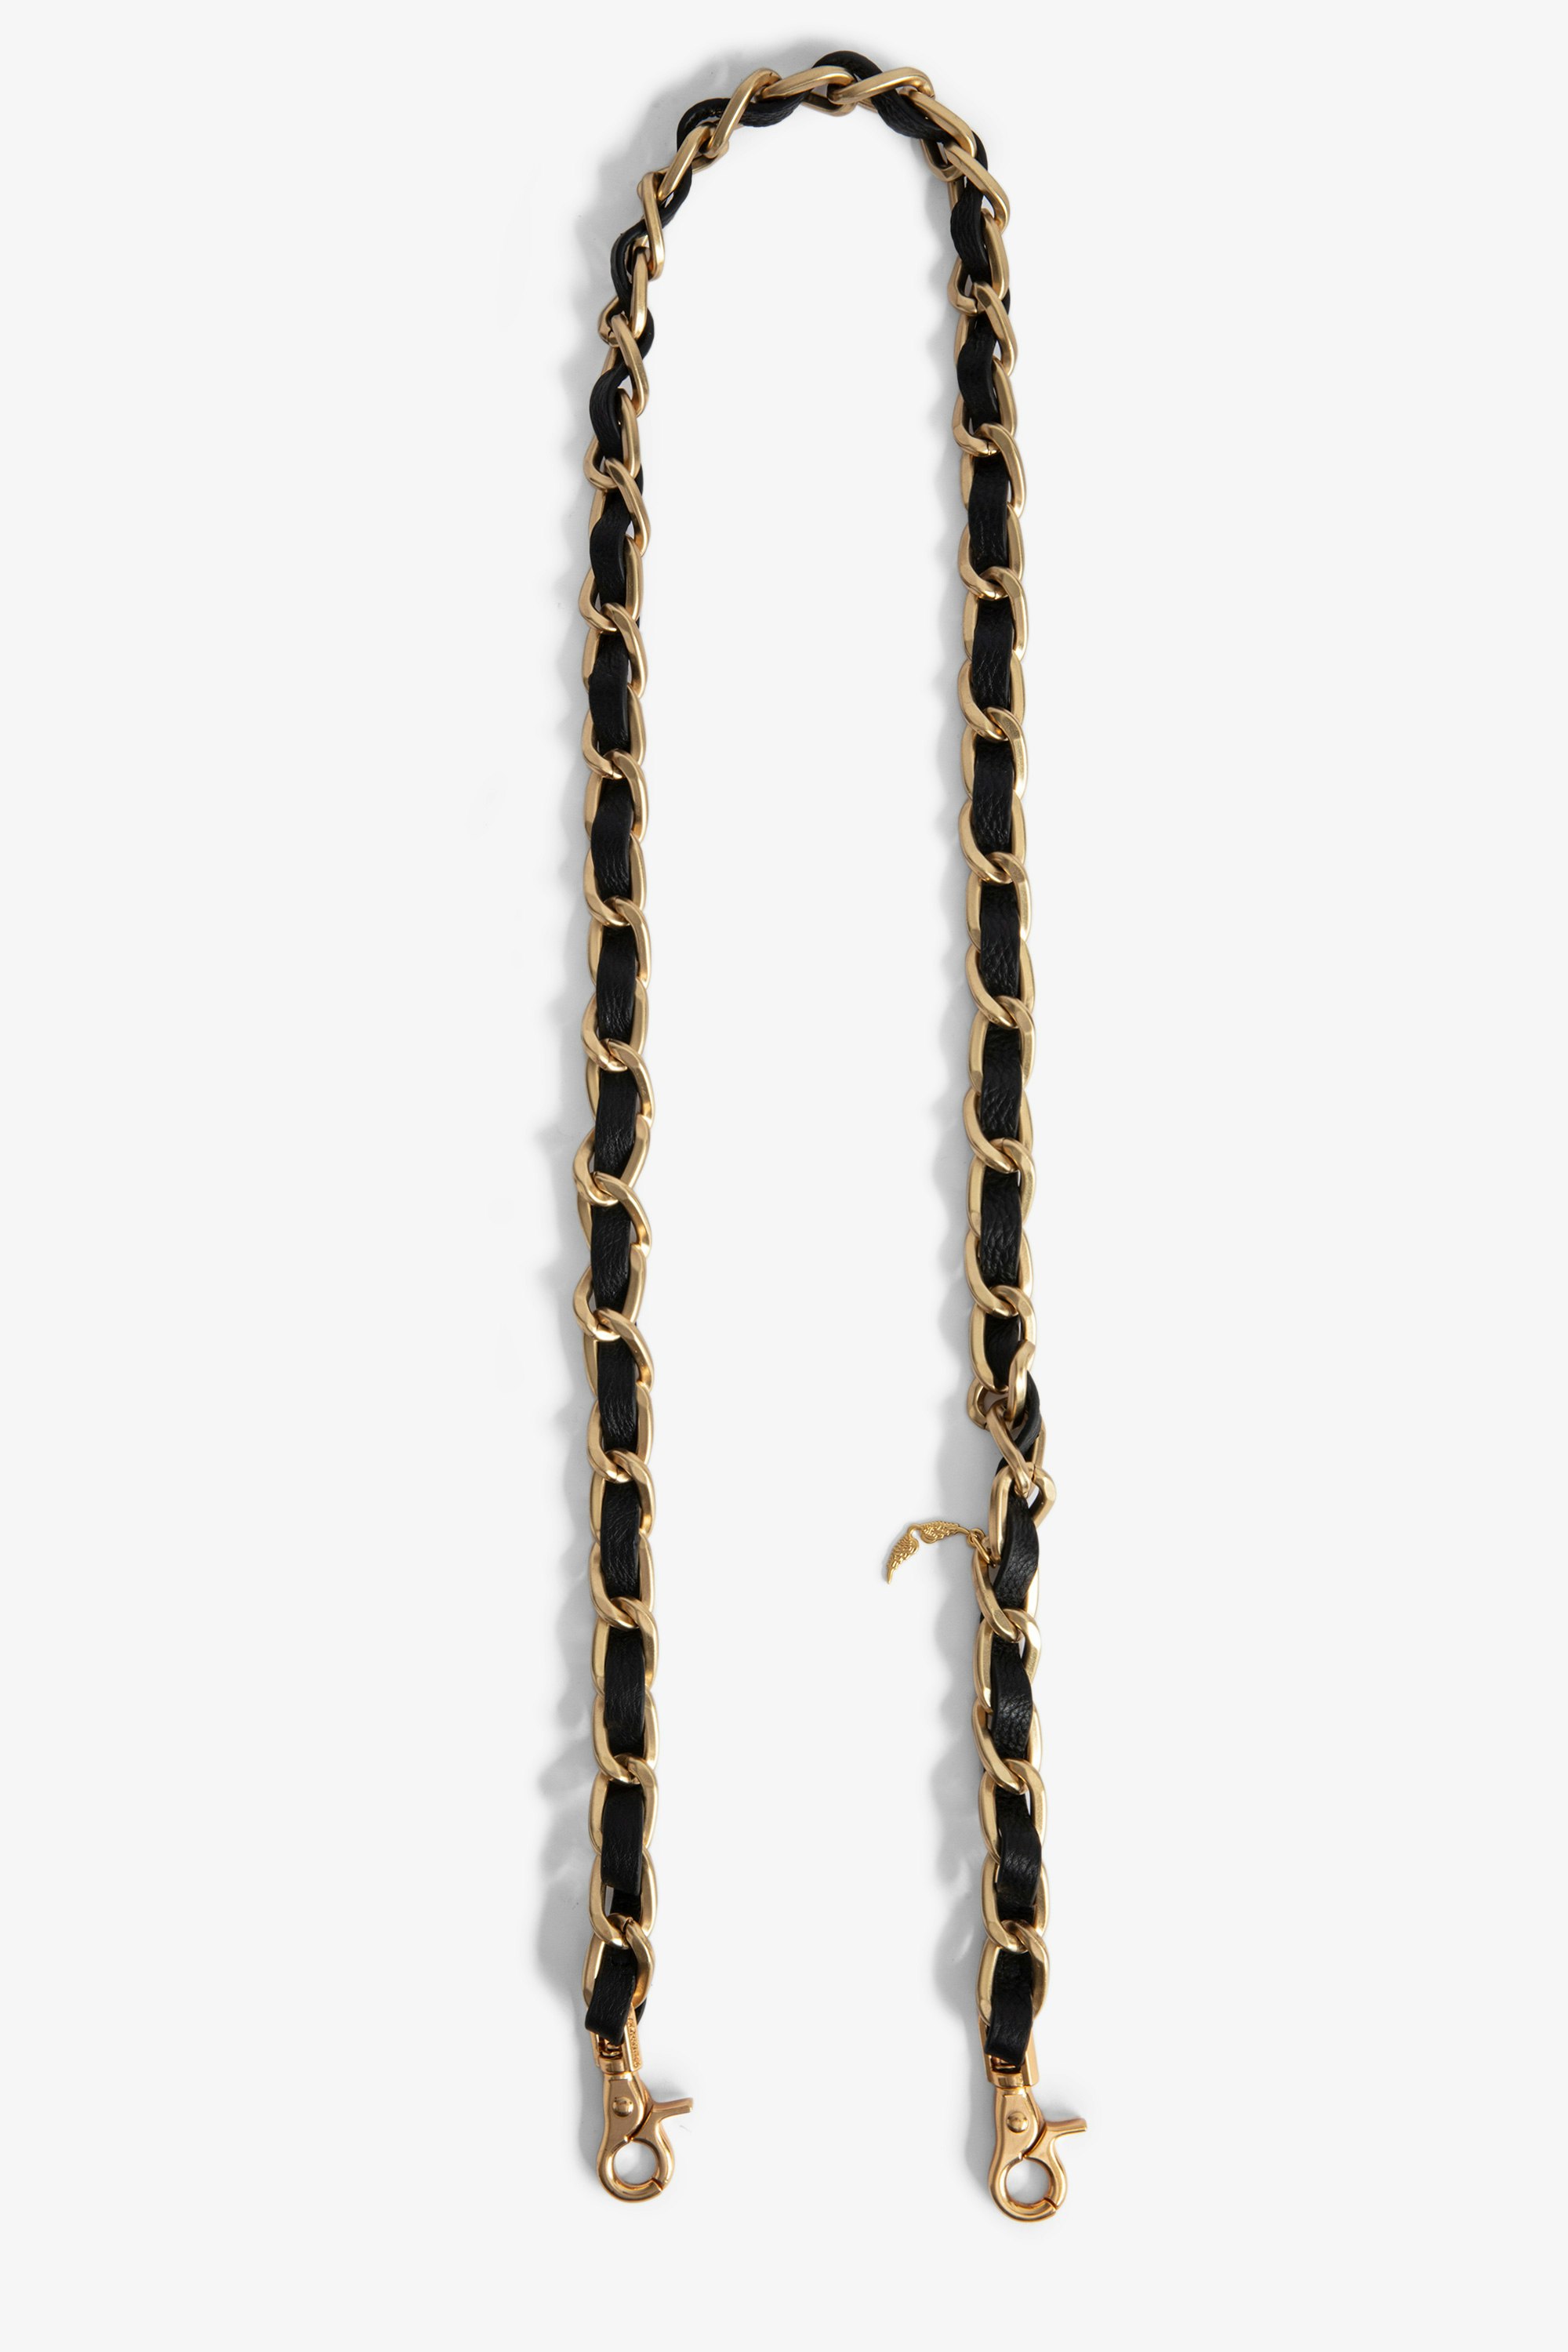 Chain and Leather Shoulder Strap undefined